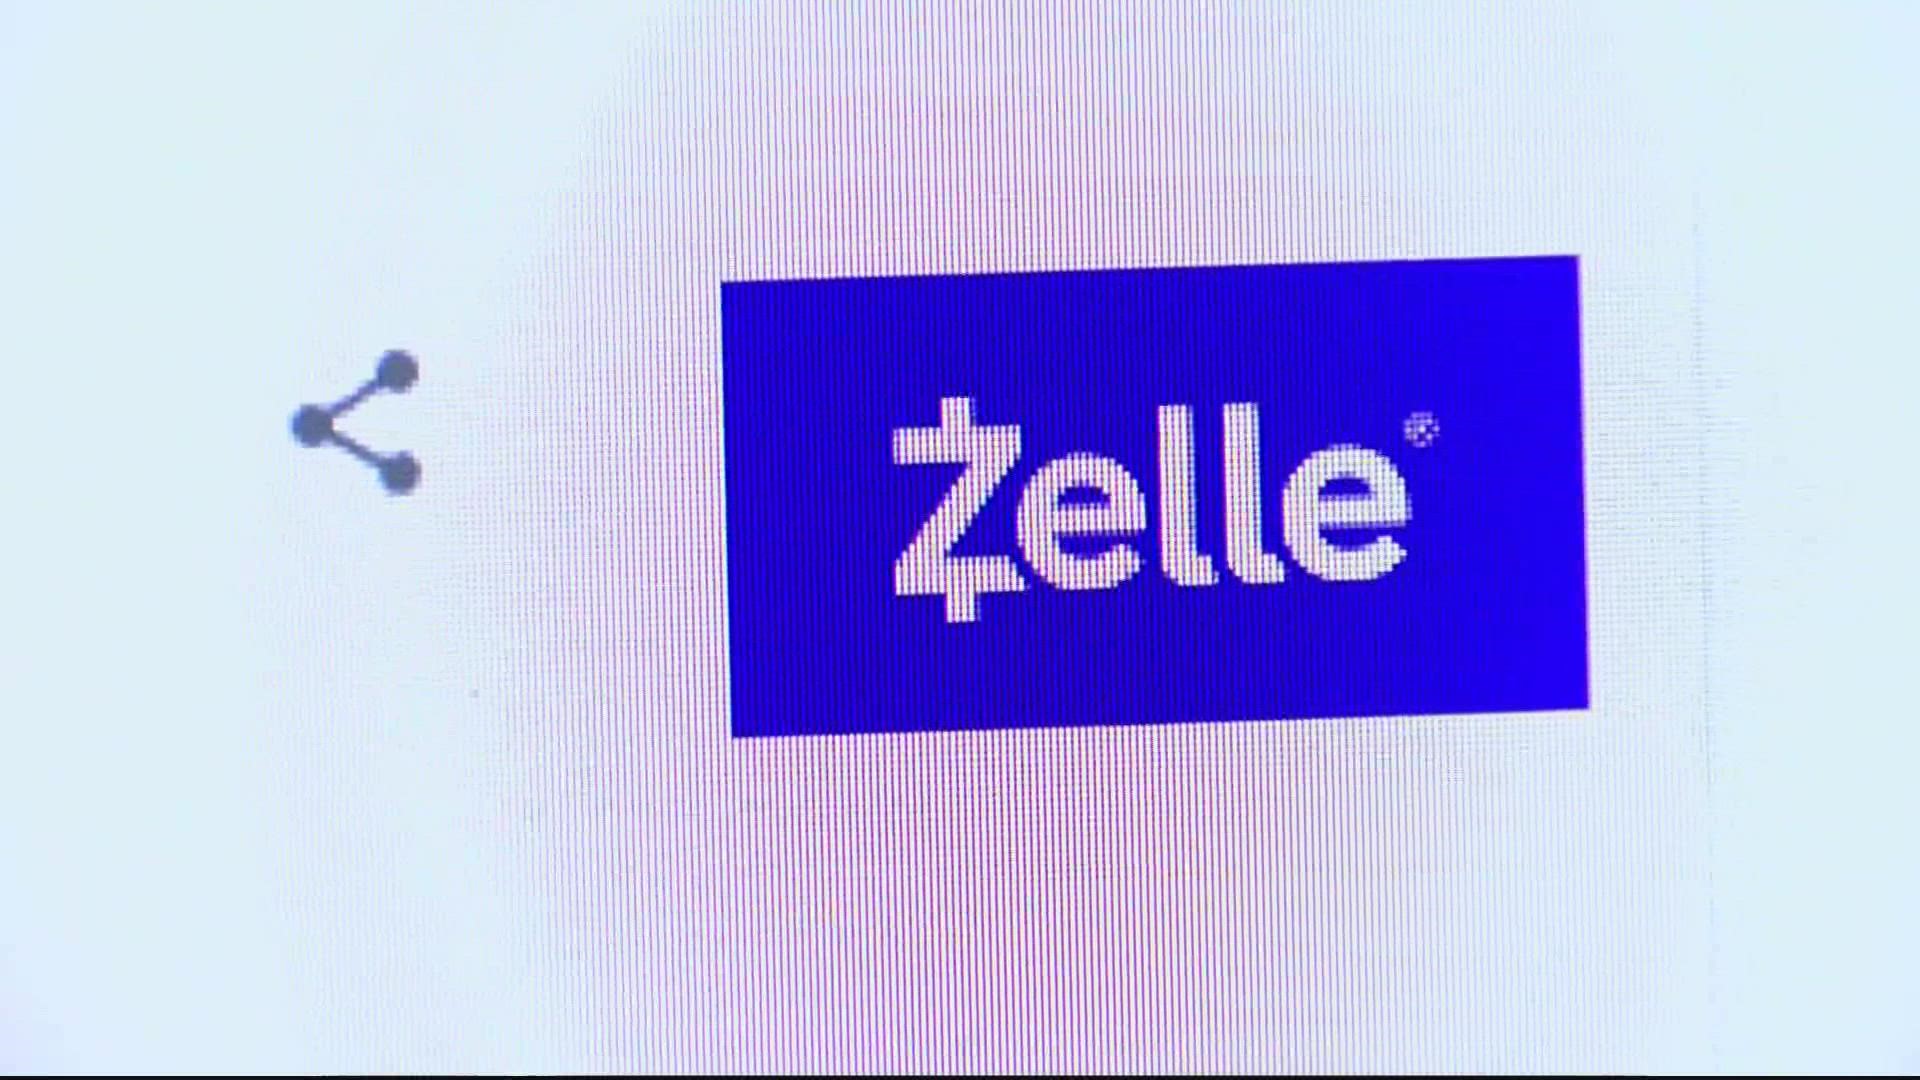 Heads up if you use the payment service Zelle. Researchers warn fraud and scams are becoming a growing problem on the app.